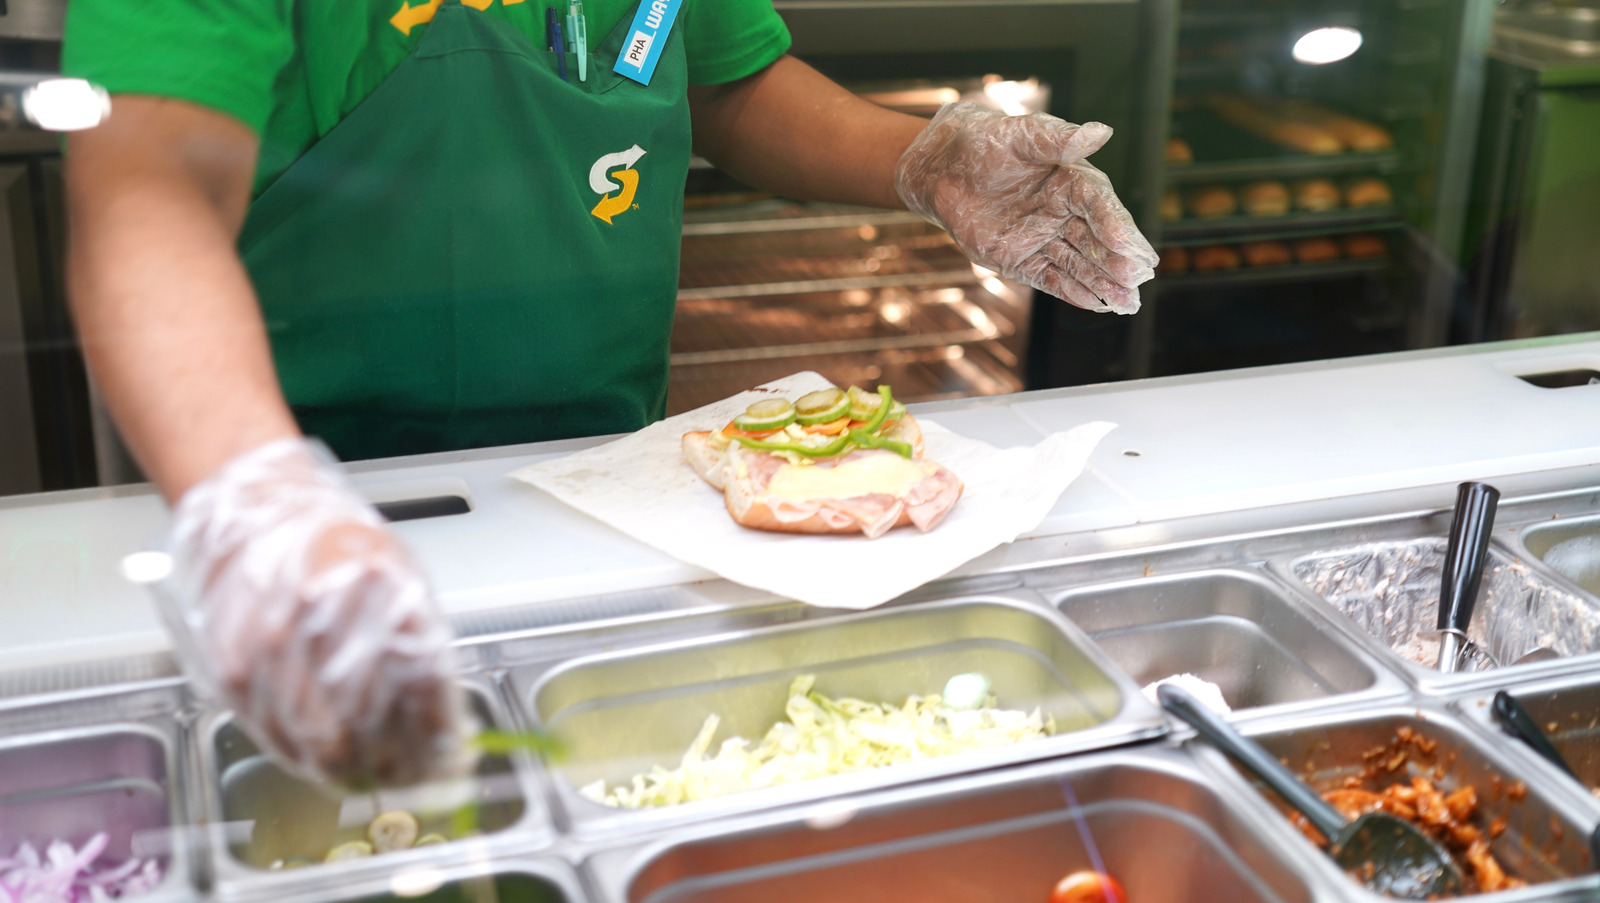 Subway Offers Free Sandwiches for Life to Change Your Name - Bloomberg